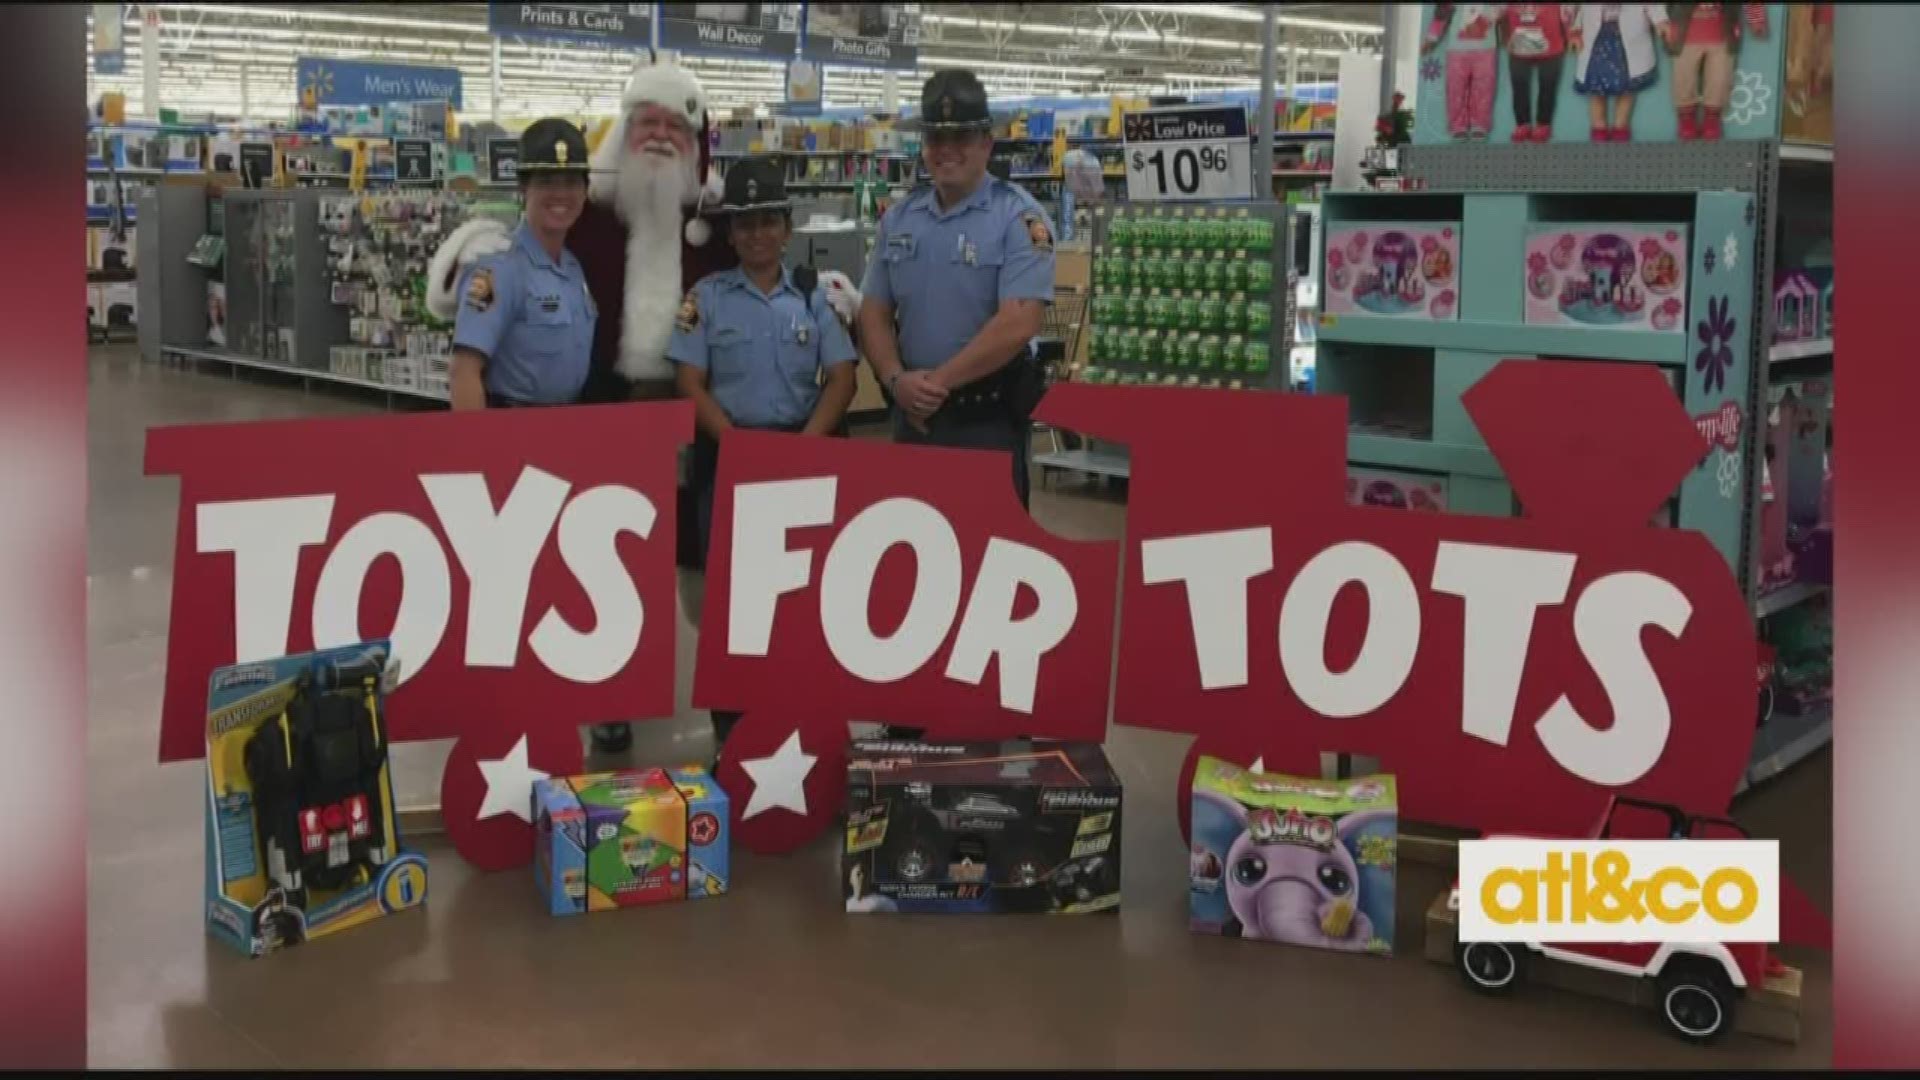 Georgia State Patrol and Toys for Tots